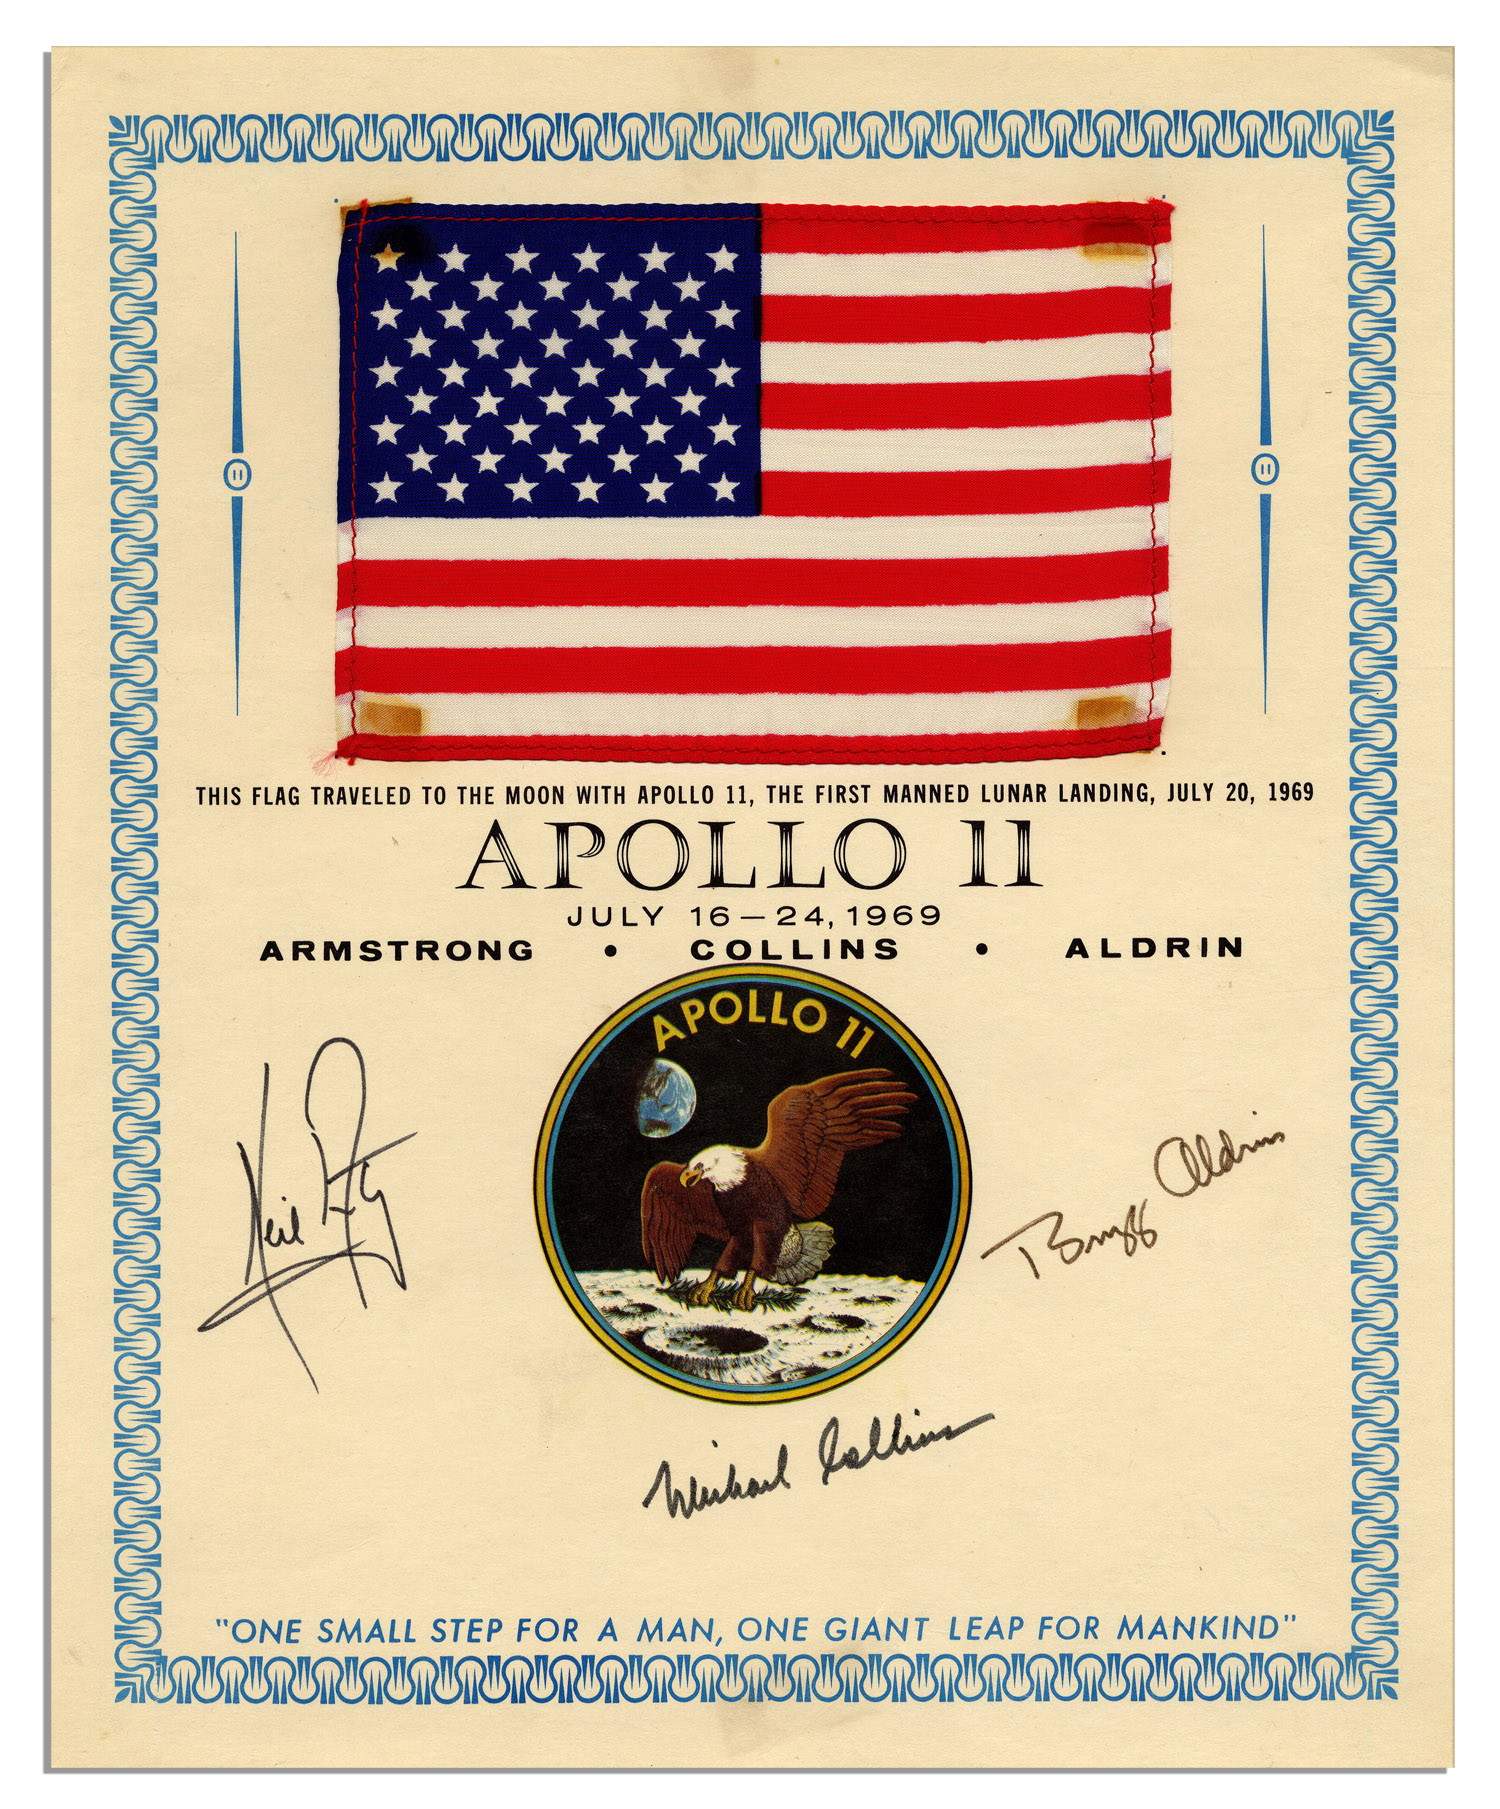 Sputnik 1 Model Apollo 11 Flag Flown to the Moon Exceptionally Scarce Apollo 11 Flag Flown to the Moon -- Signed by Armstrong, Aldrin & Collins